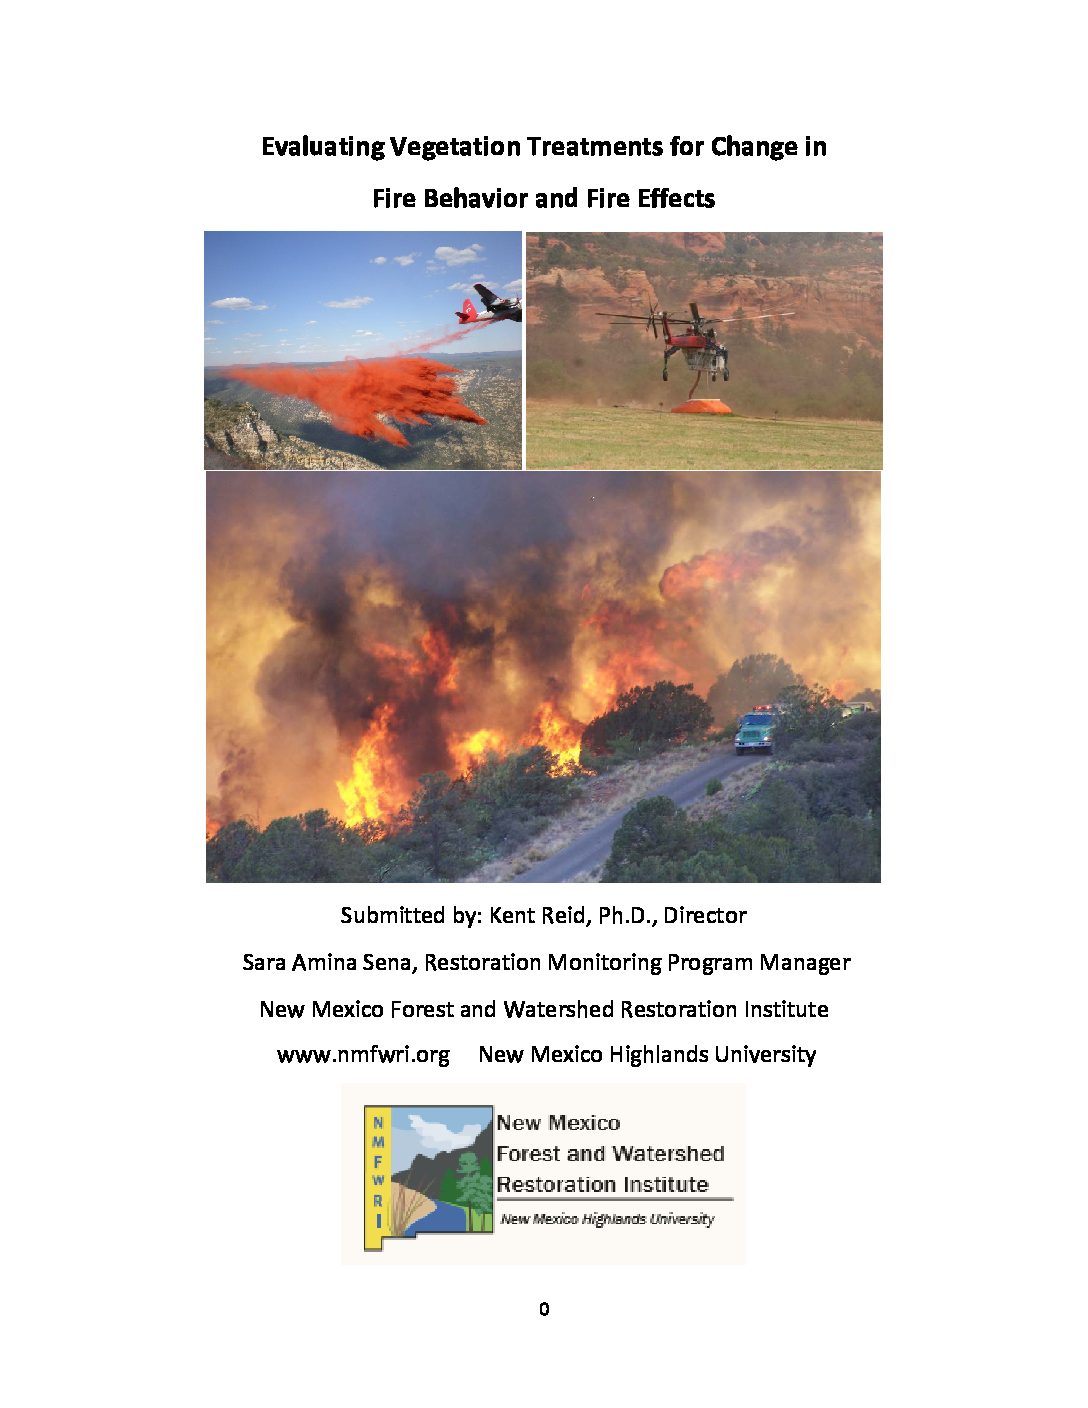 Evaluating Vegetation Treatments for Change in Fire Behavior and Fire Effects